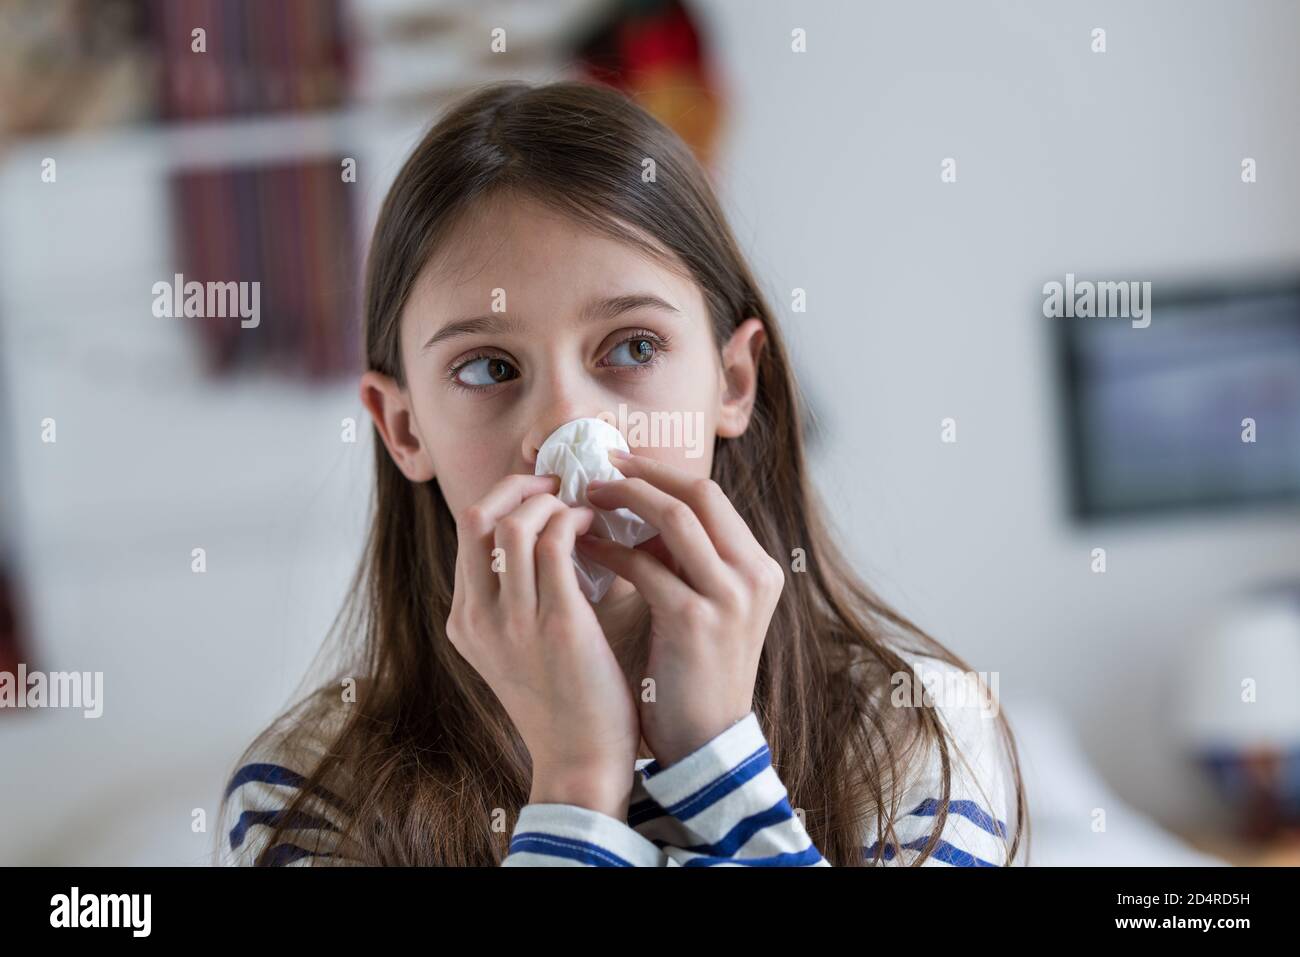 10 year old girl with a nosebleed. Stock Photo